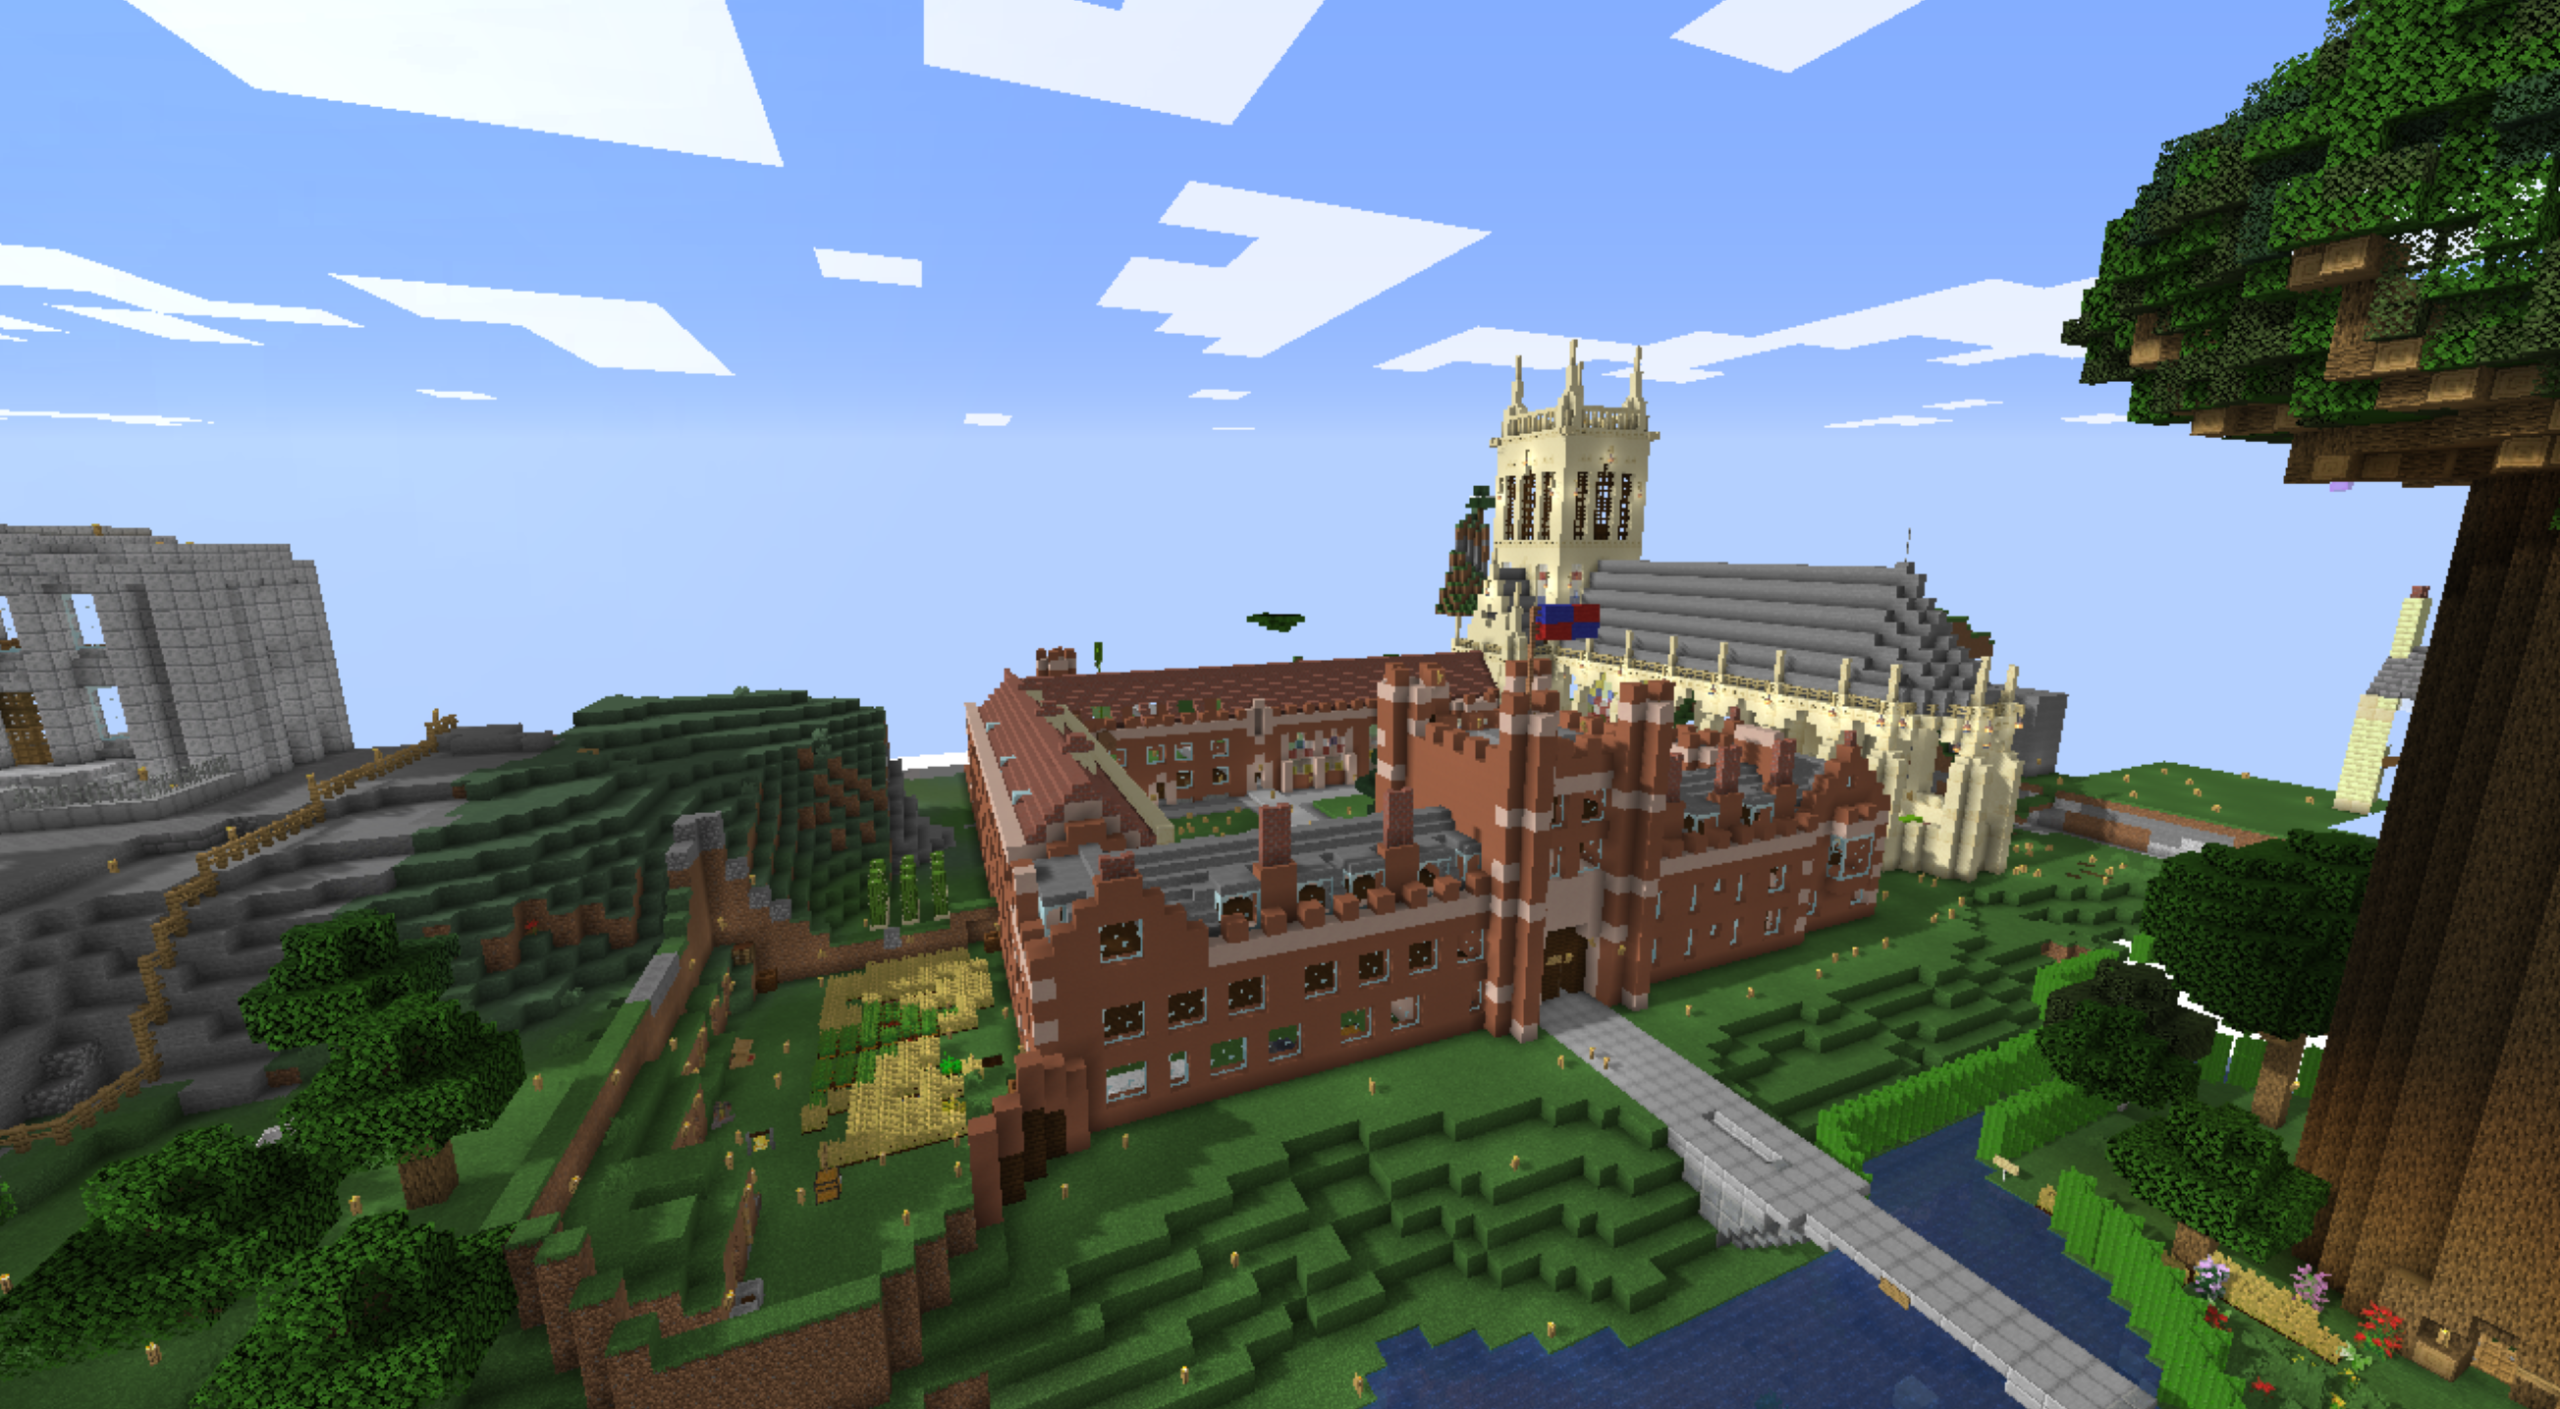 The chapel of St John's College is still a very recognisable landmark in the Minecraft Cambridge world.